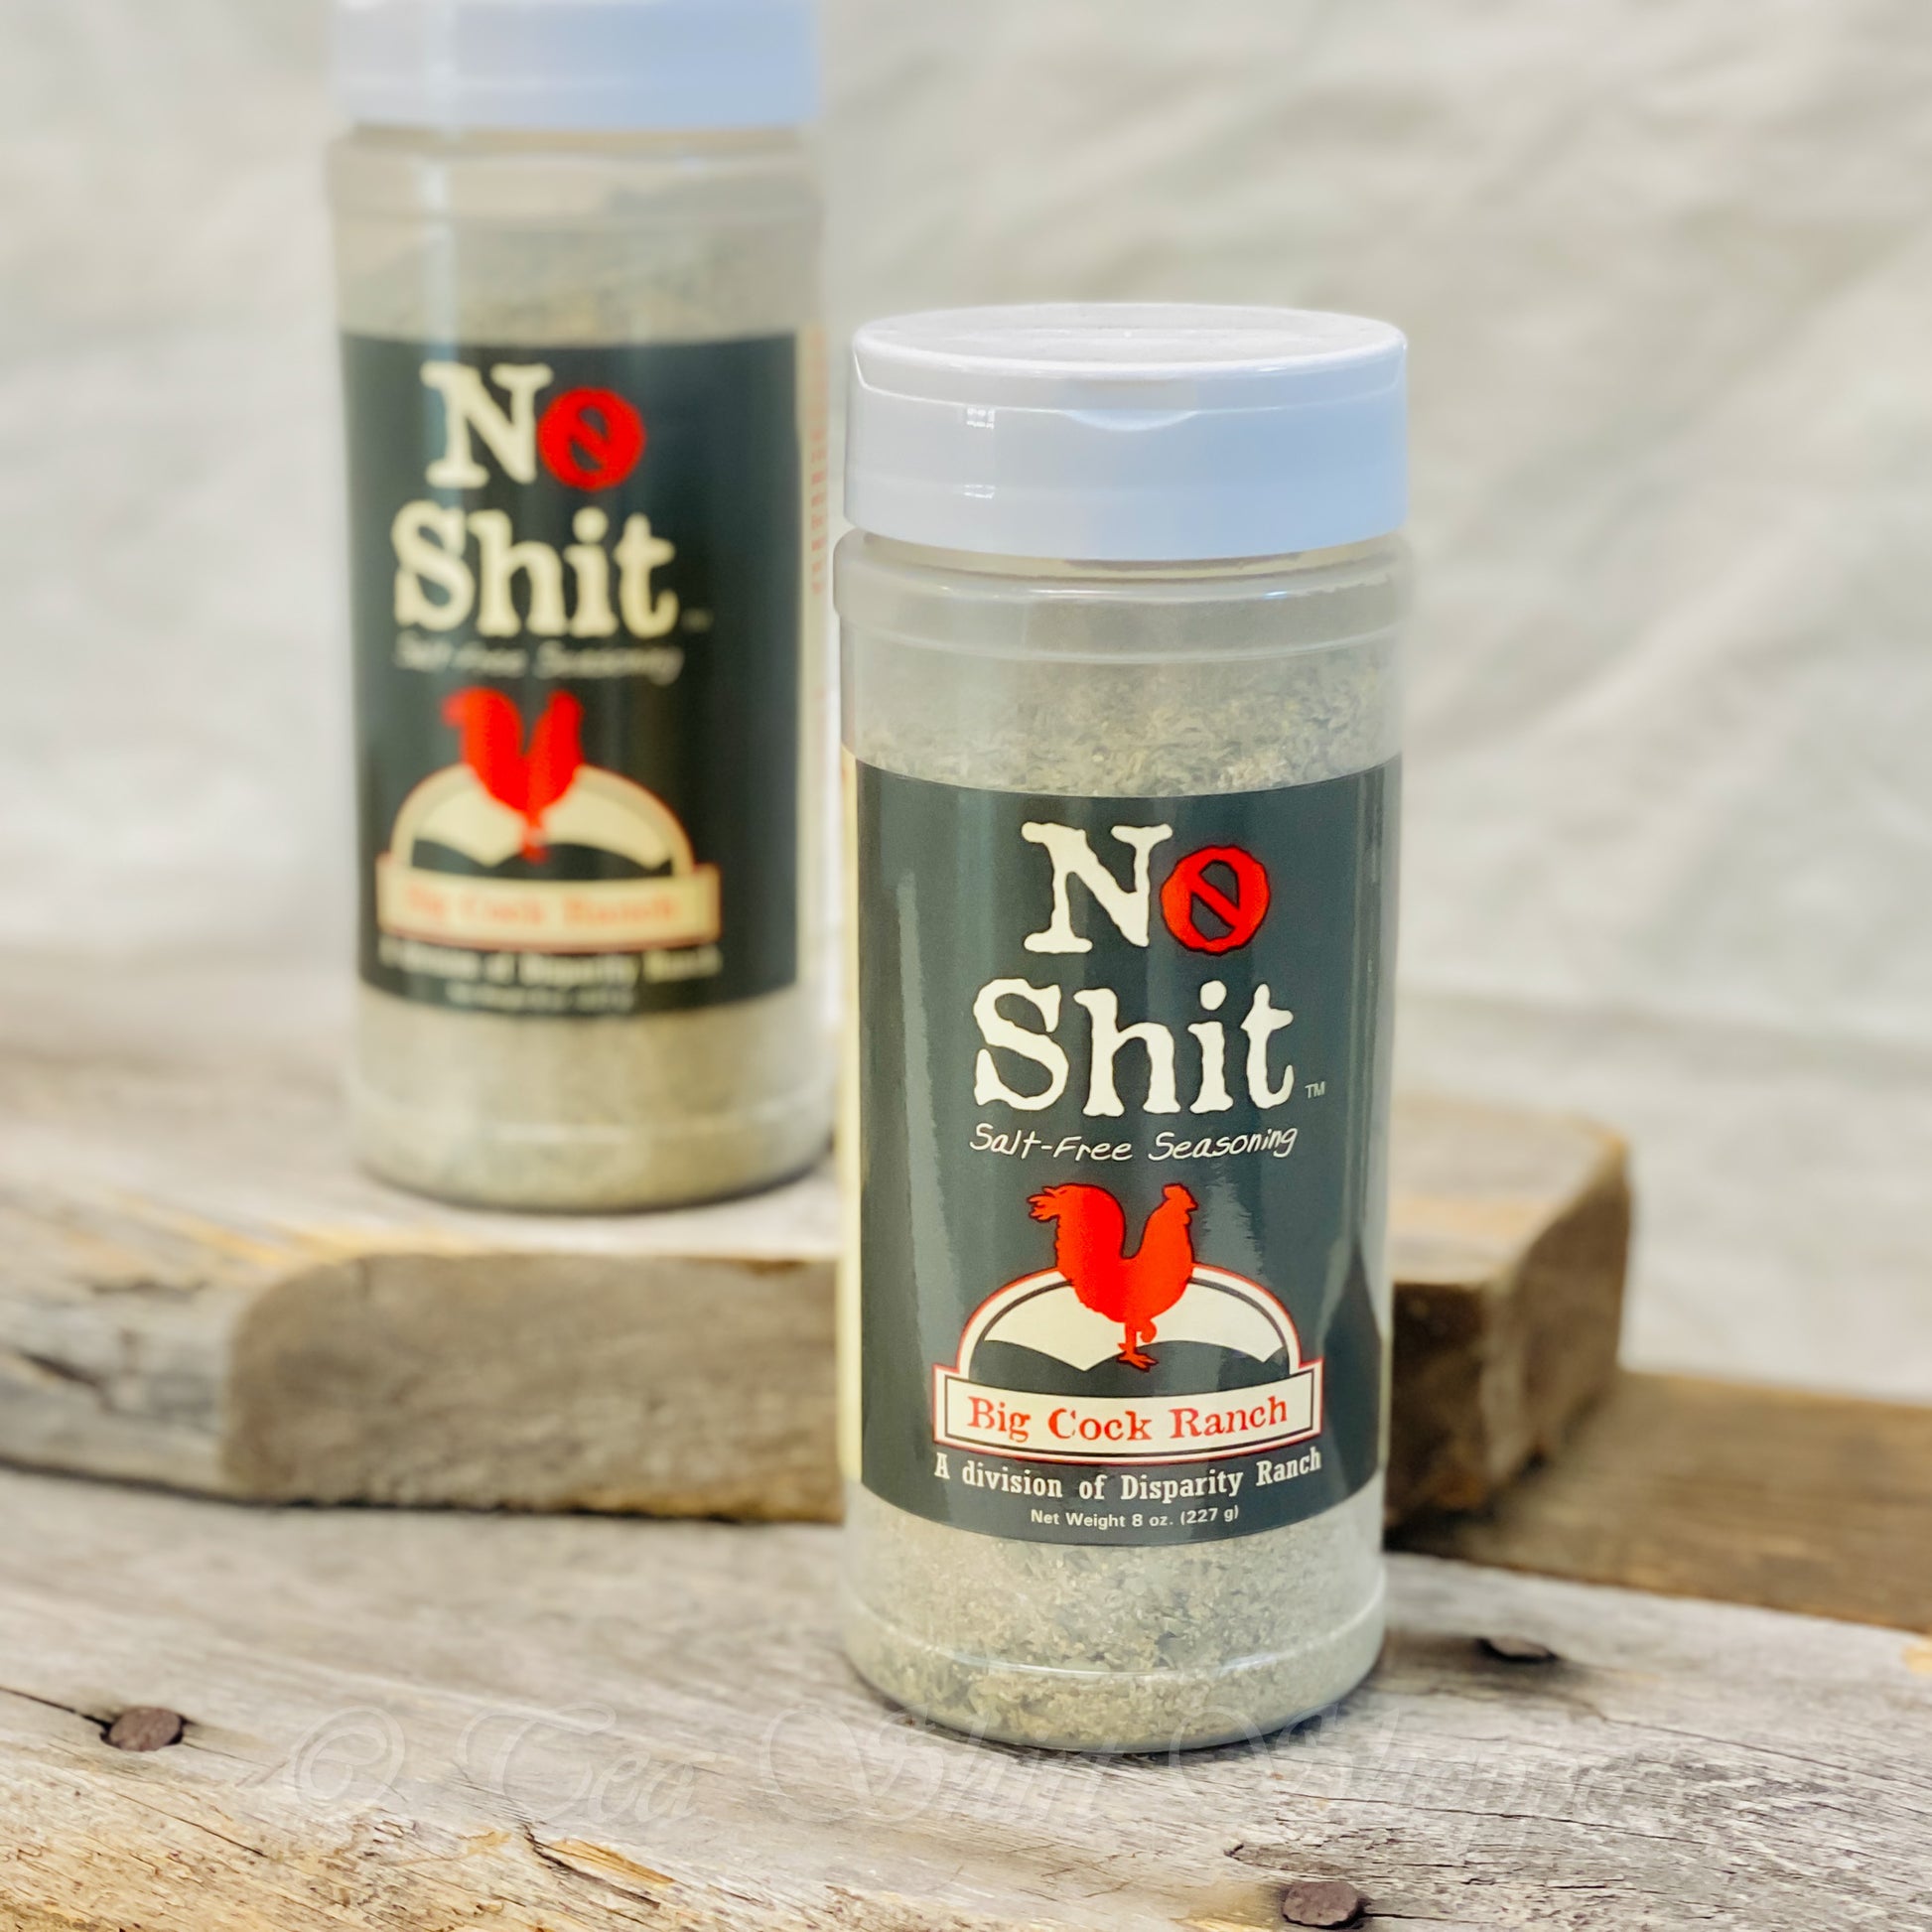 Salt Free Seasoning  No Shit was developed as an all-purpose seasoning to enhance the flavor of beef, pork, chicken, vegetables, and eggs.  